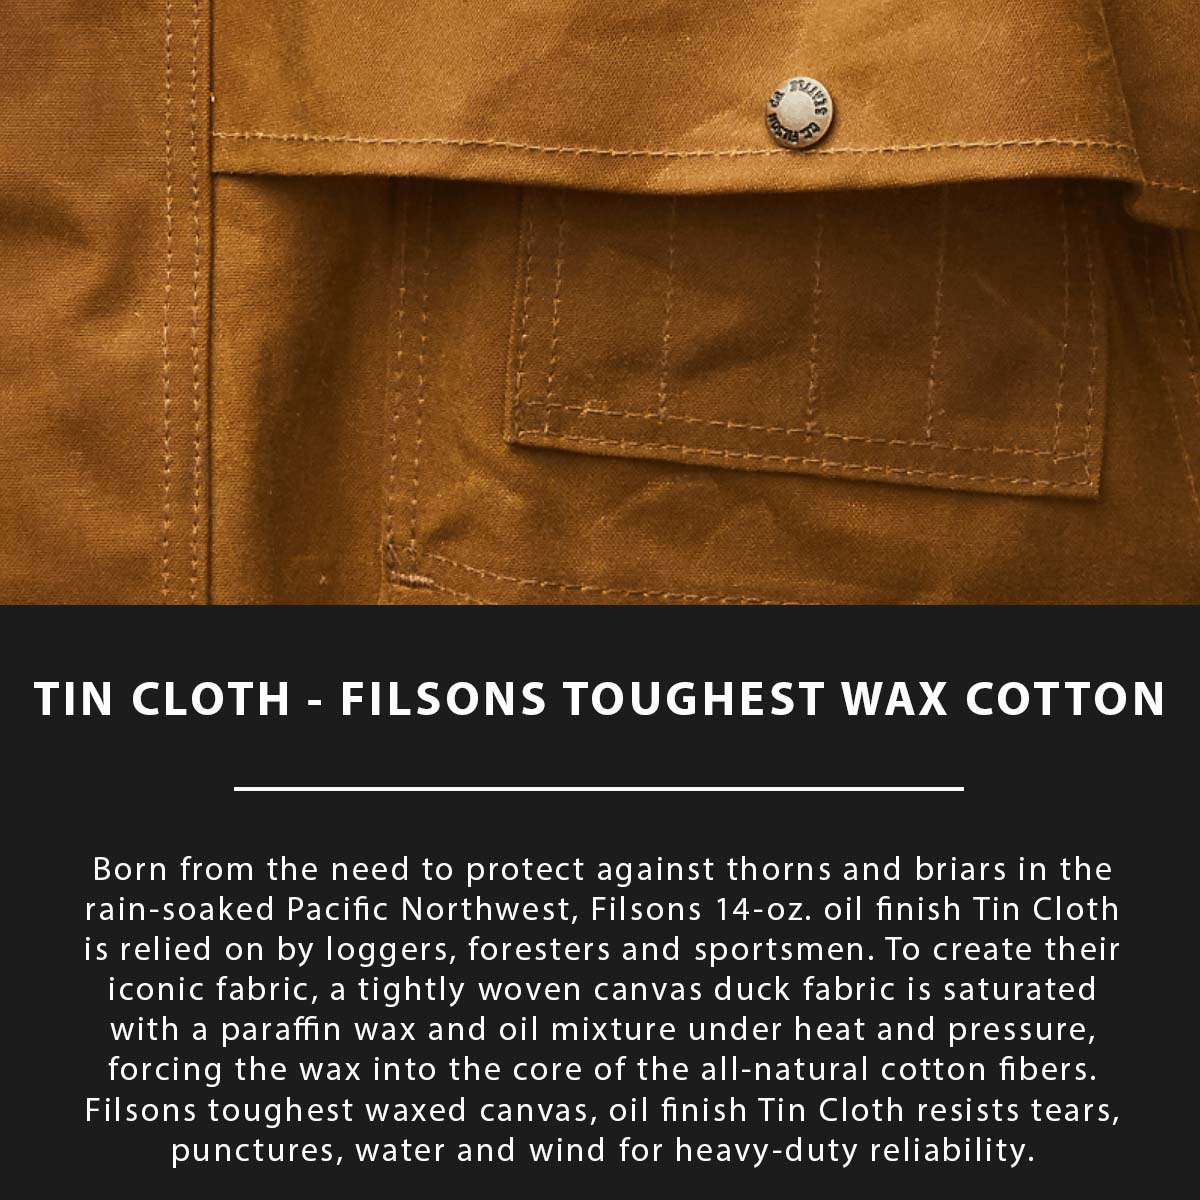 Filson Tin Cloth Work Jacket Dark Tan, made of the legendary super strong, lightweight, and oil impregnated 14-oz. Tin Cloth canvas